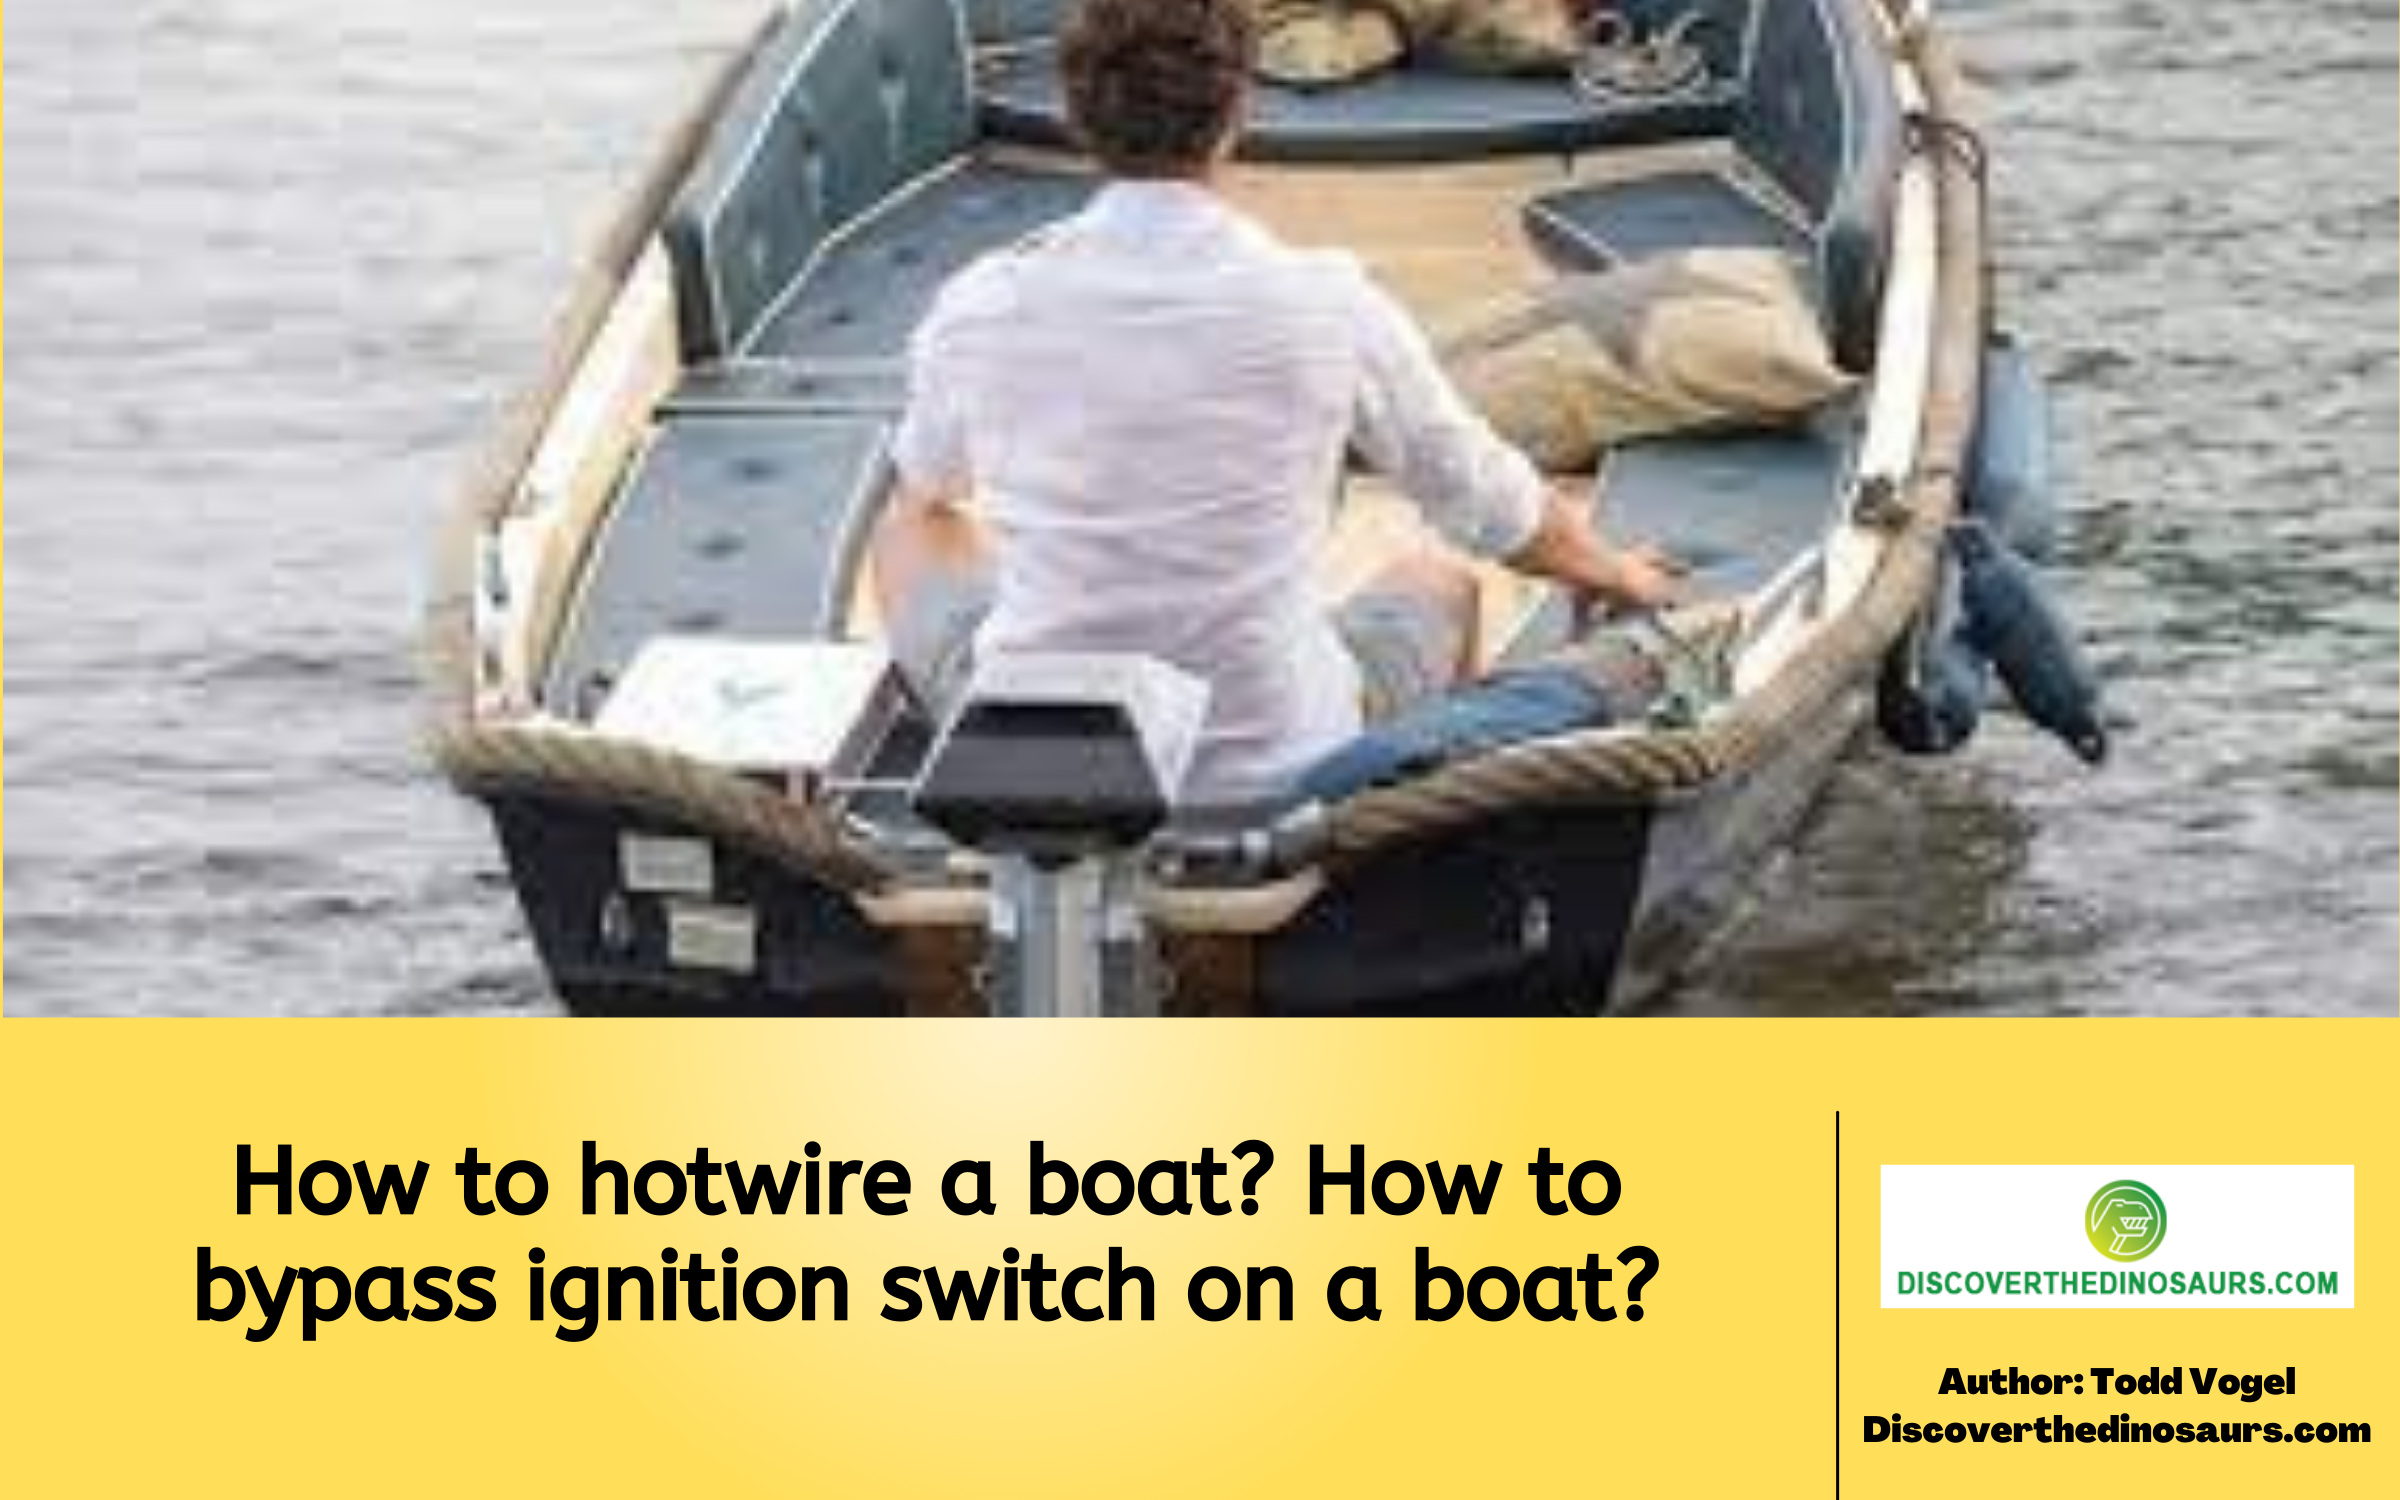 How to hotwire a boat? How to bypass ignition switch on a boat?